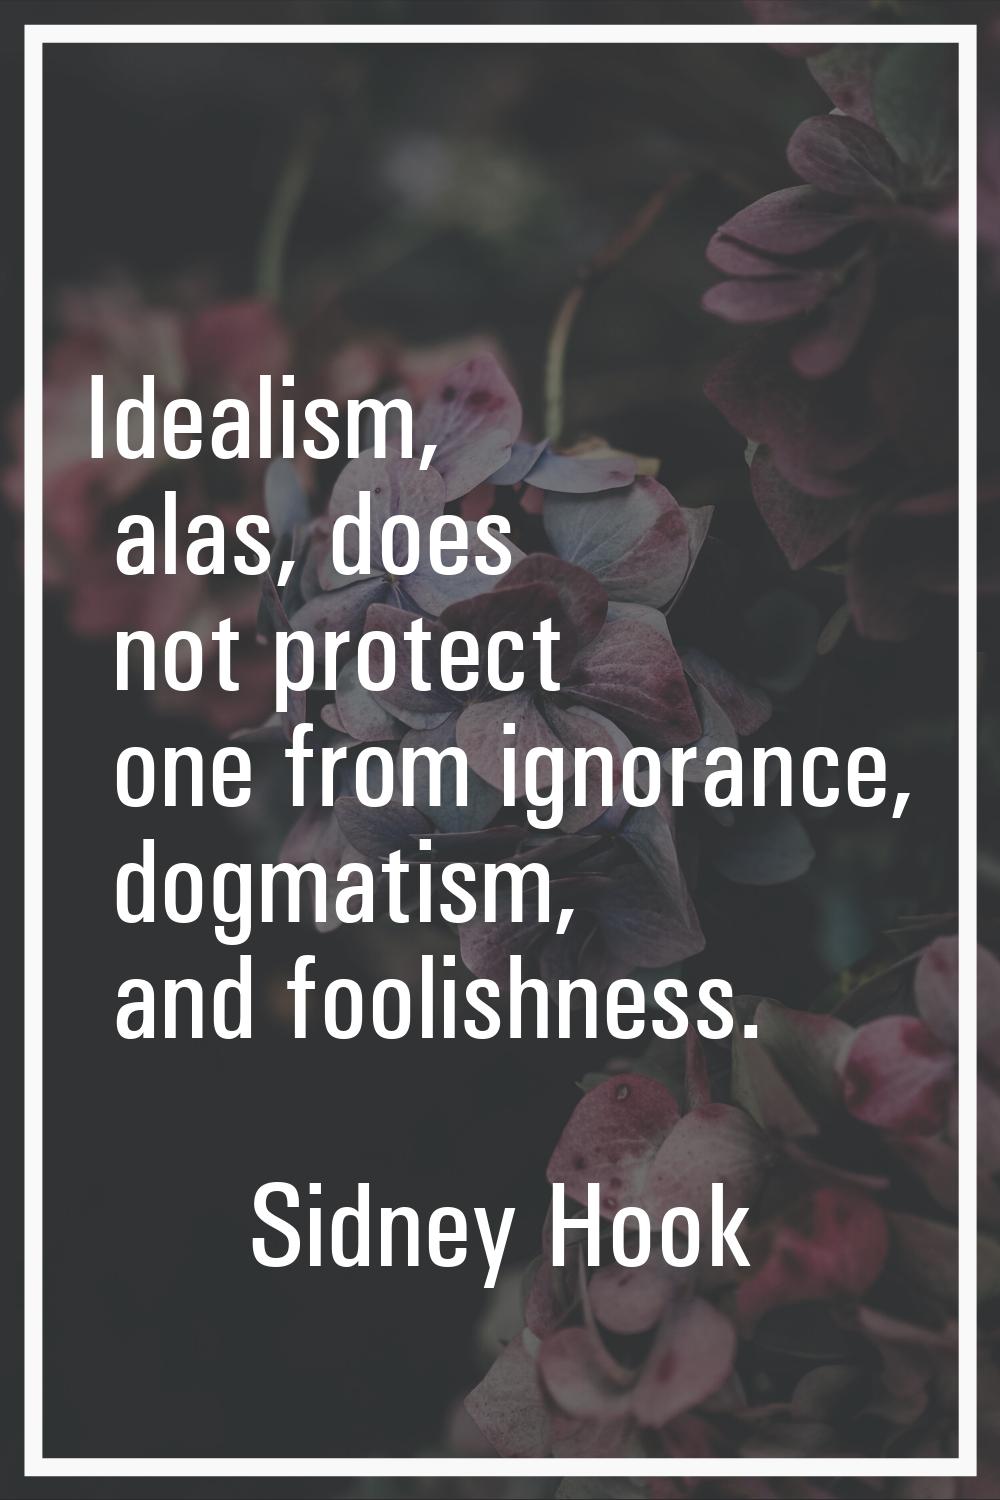 Idealism, alas, does not protect one from ignorance, dogmatism, and foolishness.